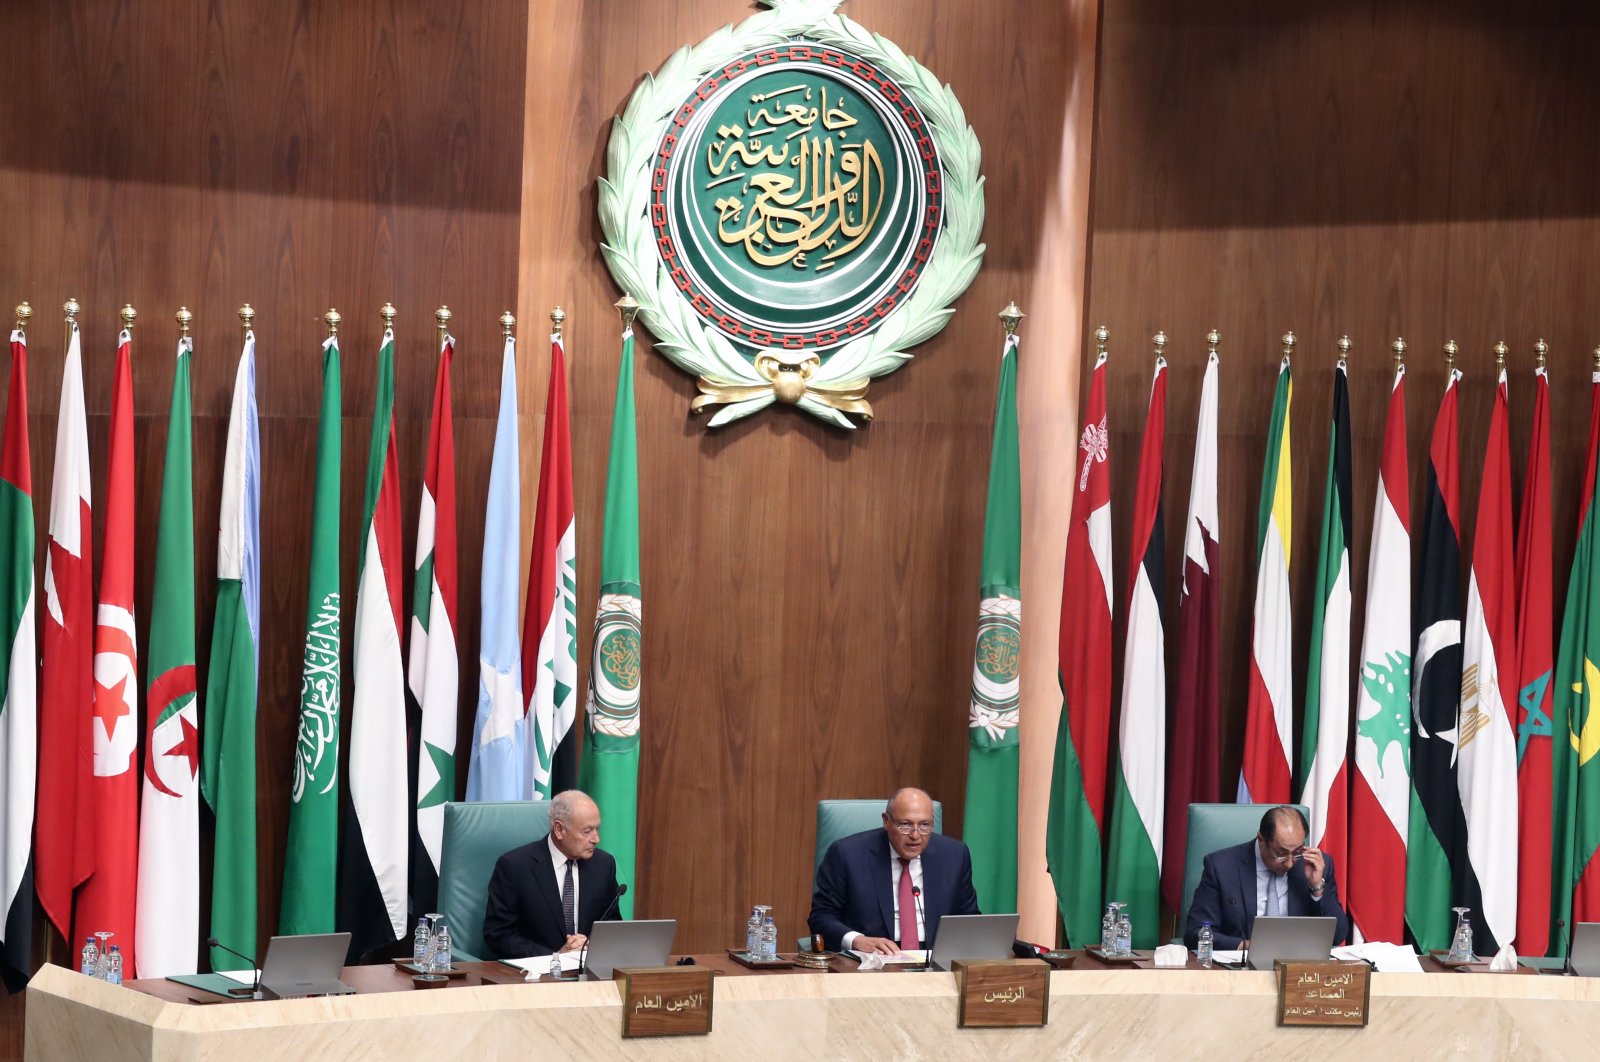 Egyptian Foreign Minister Sameh Shoukry (center), Secretary-General of the Arab League Ahmed Aboul Gheit (left), and Assistant Secretary-General responsible for the League&#039;s Council, Ambassador Hossam Zaki (R) attend the 159th ordinary session of the Arab League Council at the Arab League headquarters in Cairo, Egypt, March 8, 2023.  (EPA Photo)